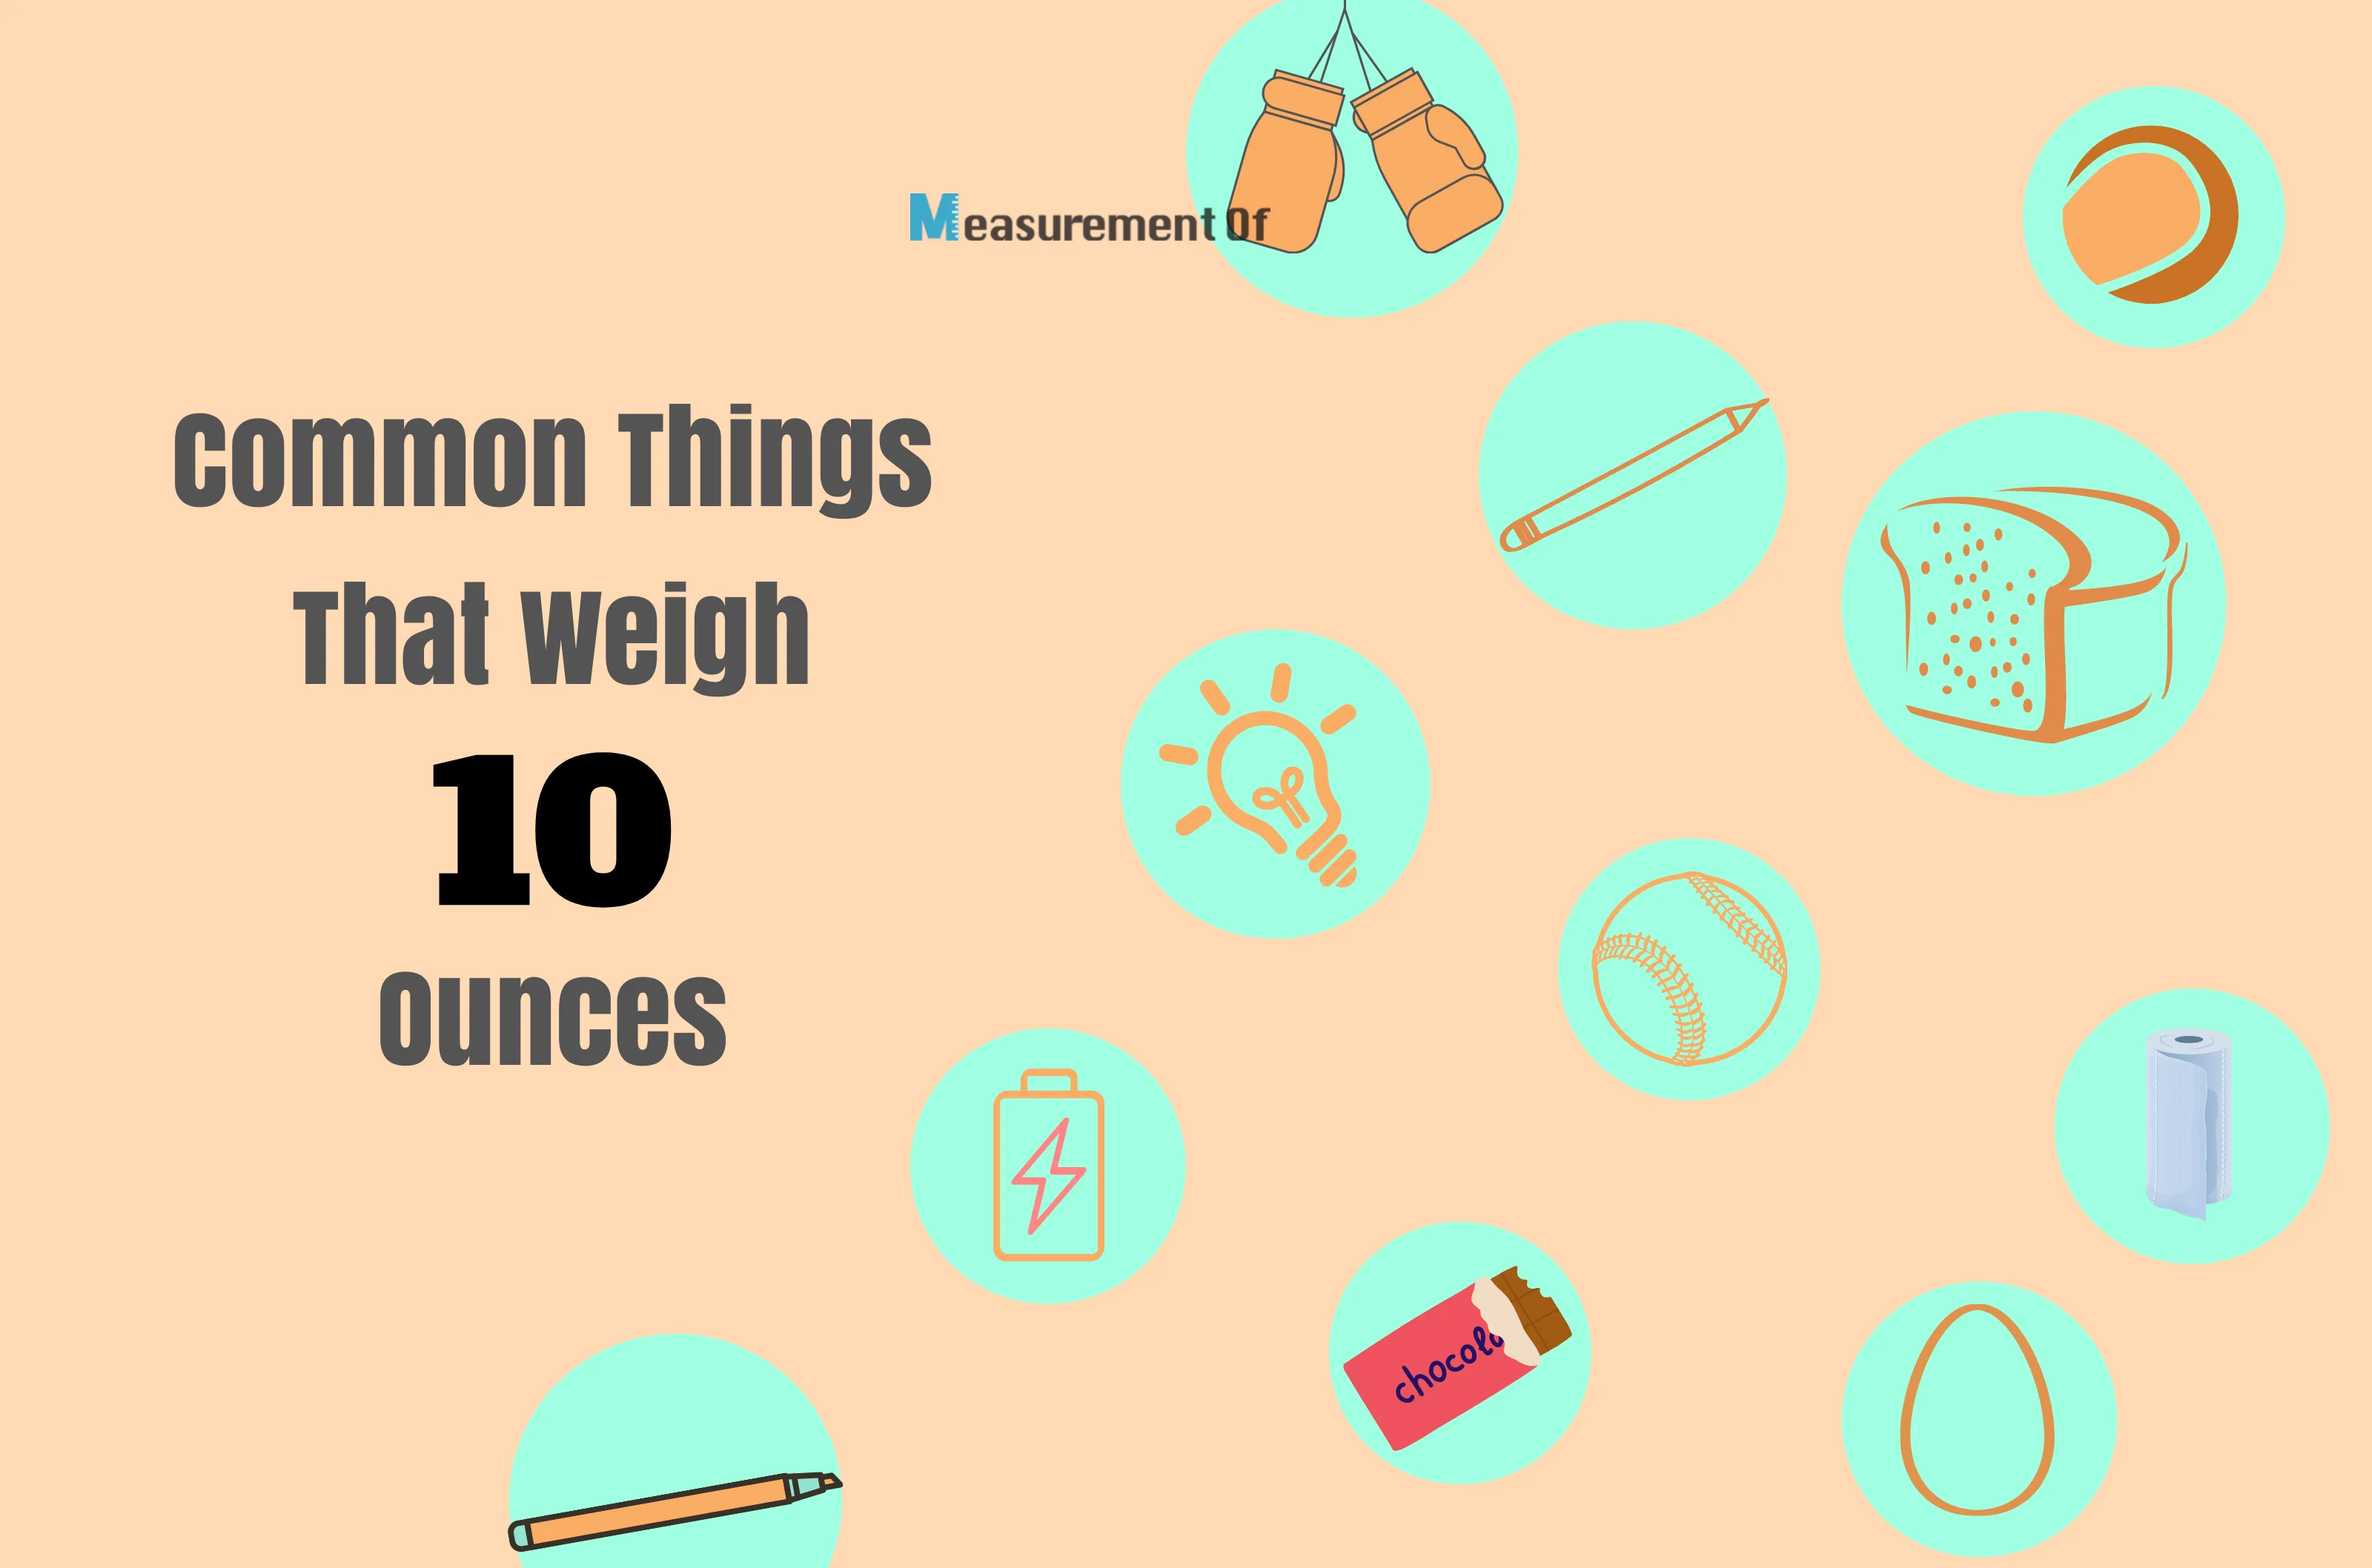 14 common objects that weigh 10 ounces individually or collectively are shown in little light green circles and the blog header is added to the graphics in black